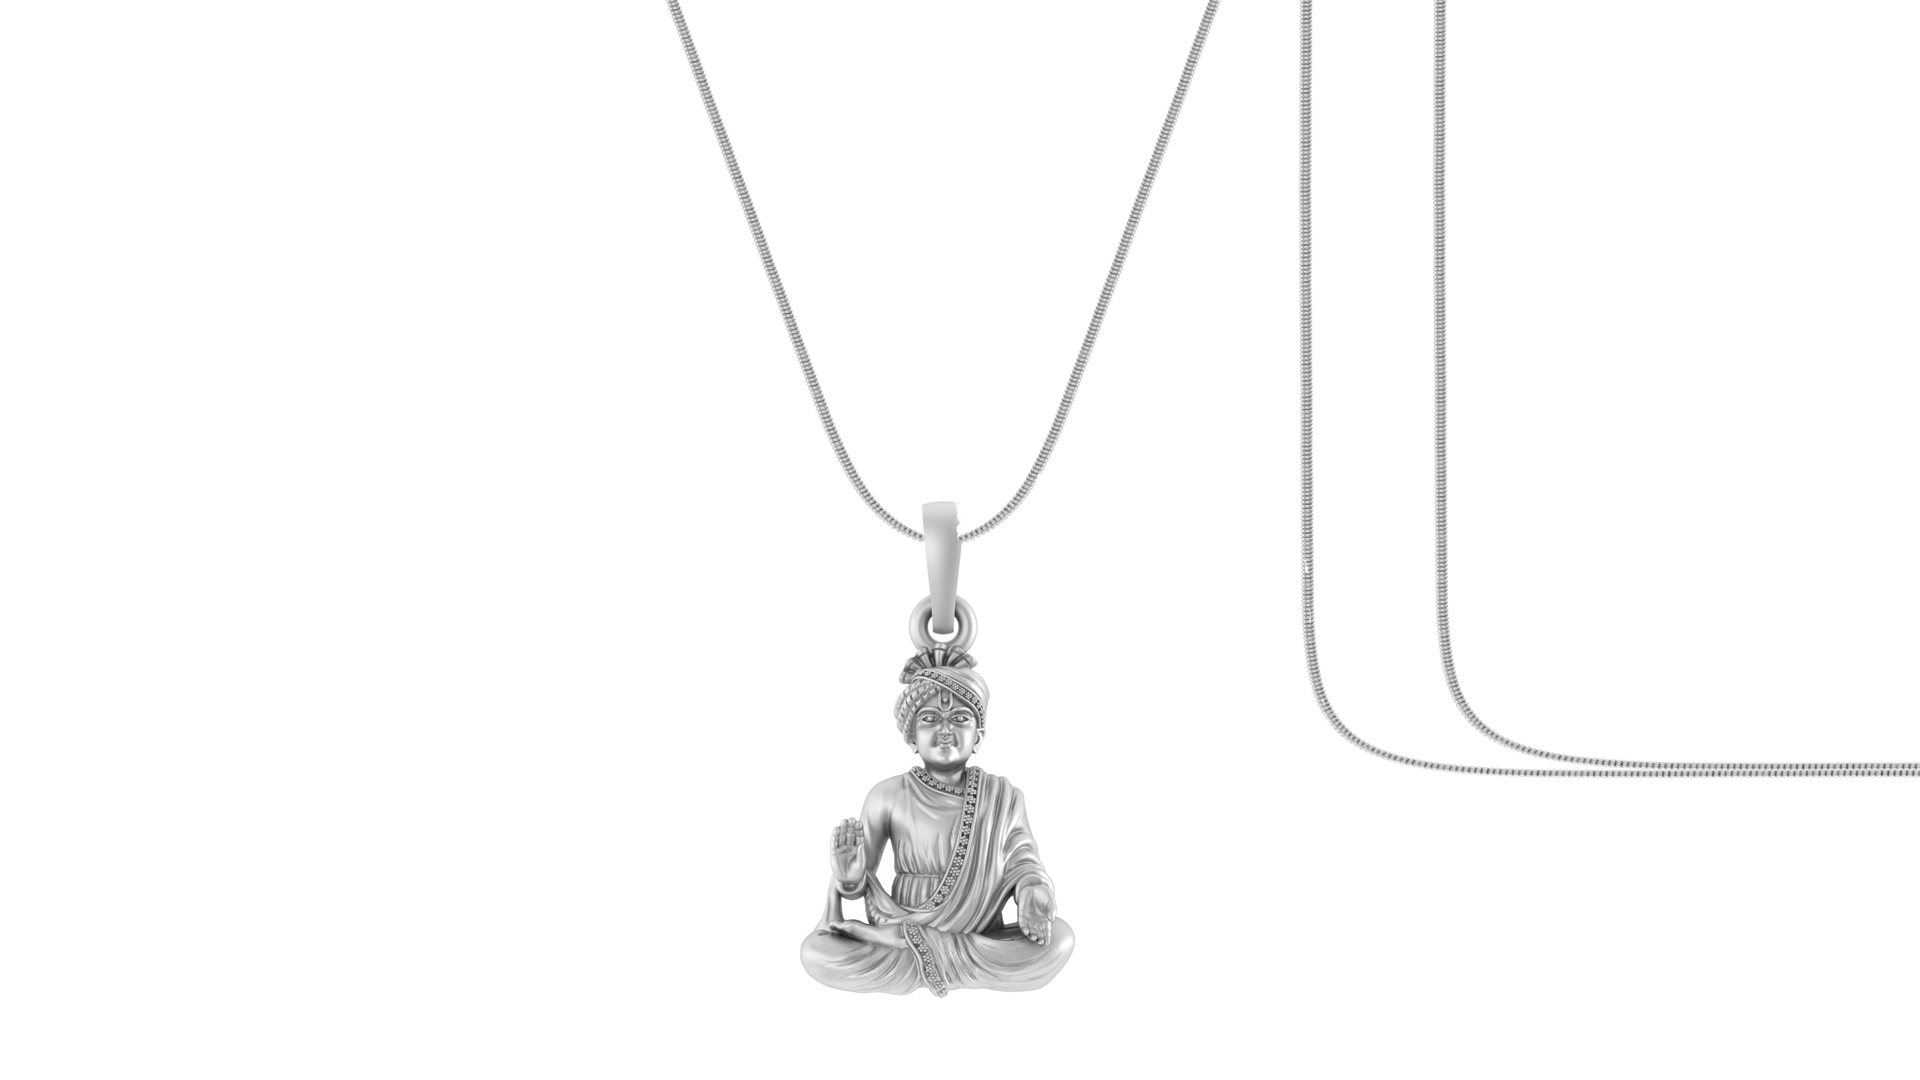 Akshat Sapphire Sterling Silver (92.5% purity) God Swaminarayan Chain Pendant (Pendant with Snake Chain-22 inches) for Men & Women Pure Silver Swaminarayan Chain Locket for Good Health & Wealth